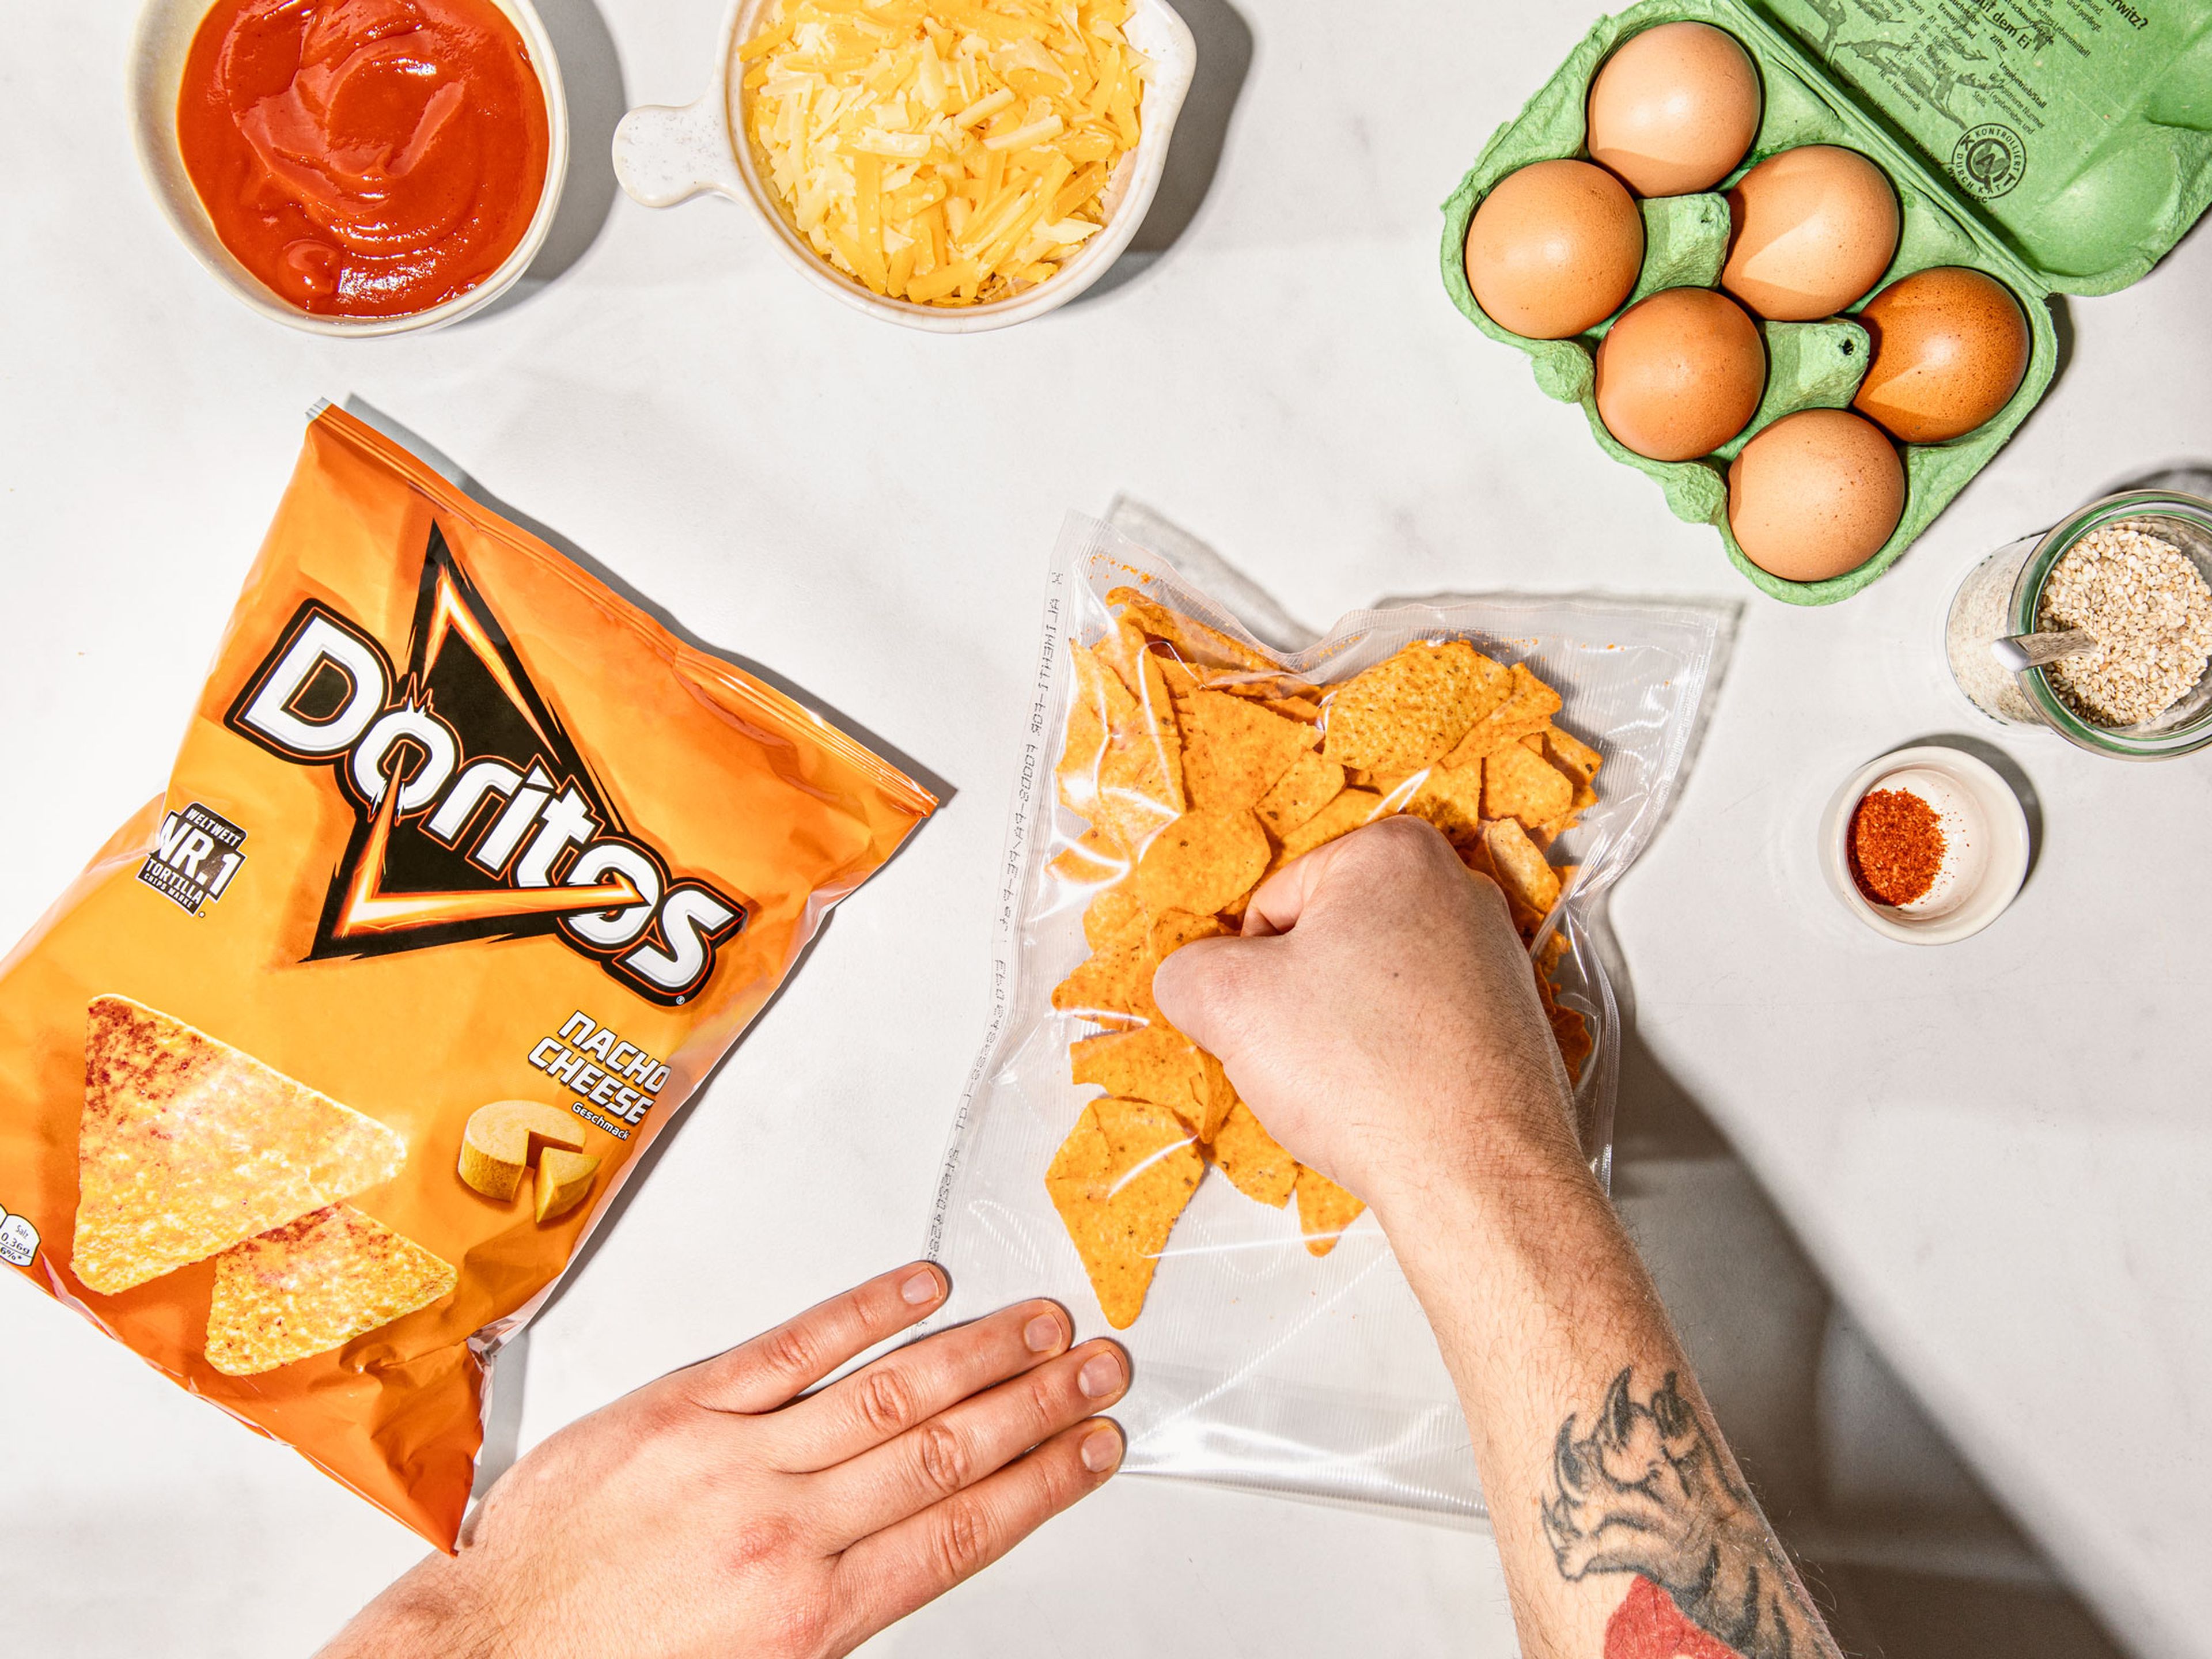 Preheat oven to 200°C/400°F. Transfer Doritos to a resealable freezer bag and crush until fine, then mix with cheddar cheese in a small bowl. Crack egg into another small bowl and beat. Line a baking sheet with parchment paper and set aside.